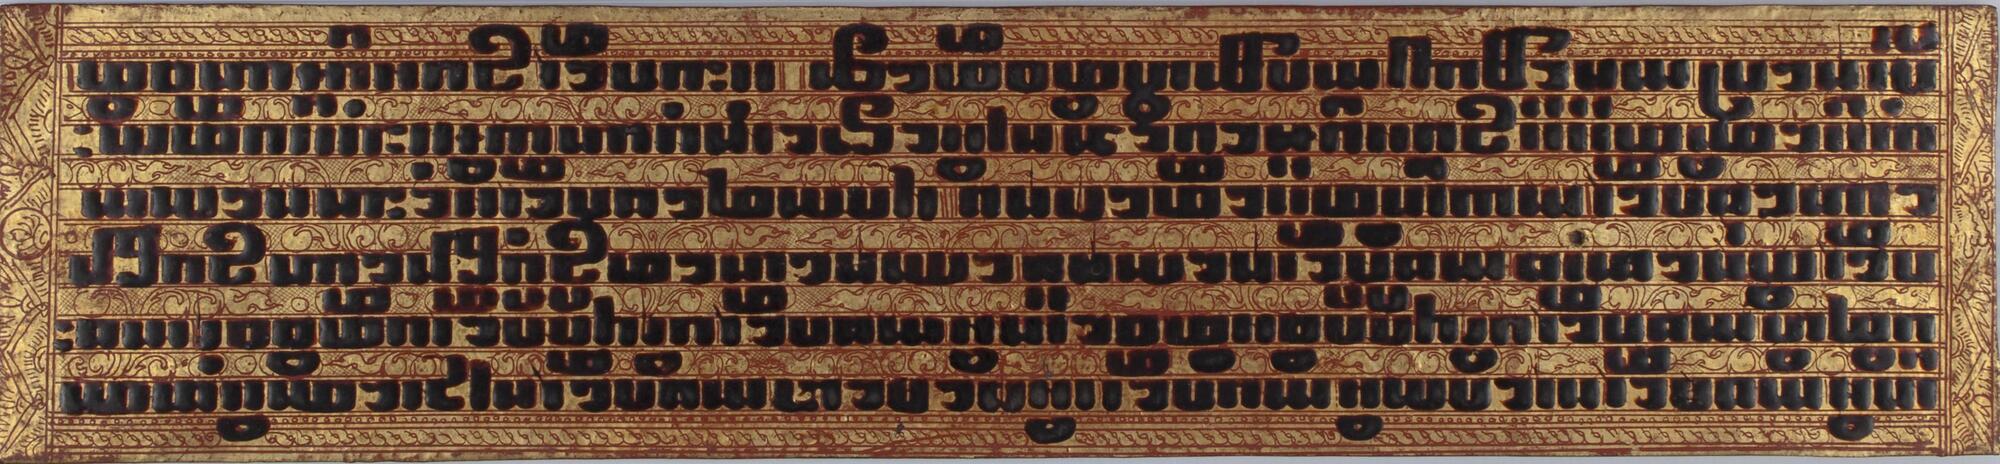 This prayer book consists of 20 pages written on the front and back in the Myanmar language. It is decorated in golds and reds with black text.